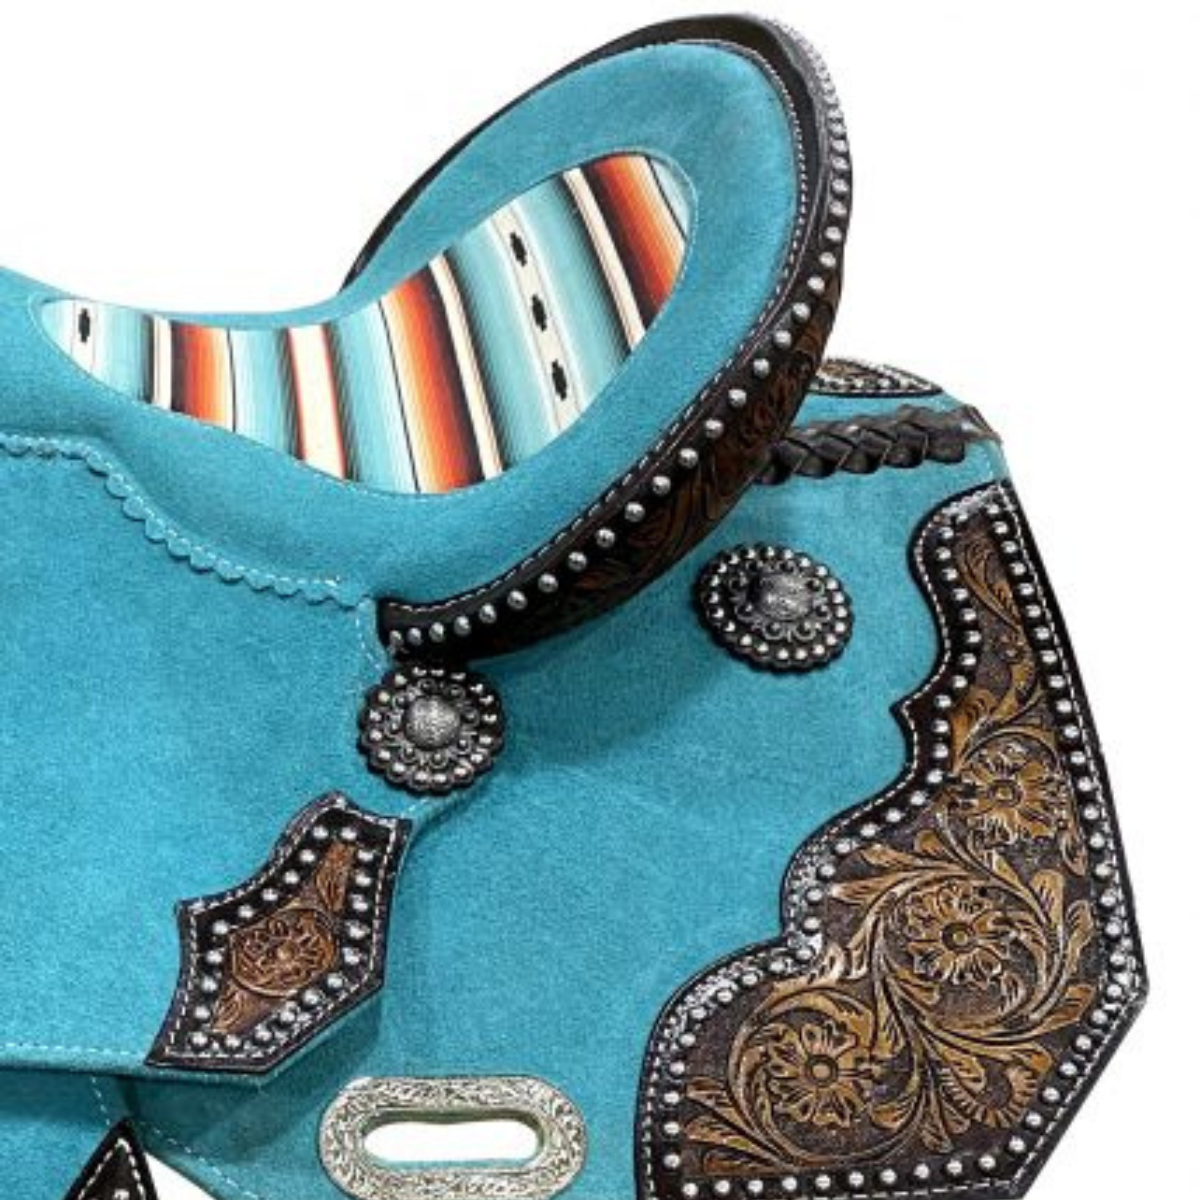 15" DOUBLE T   TEAL ROUGH OUT BARREL STYLE SADDLE WITH SOUTHWEST PRINTED INLAY - Double T Saddles